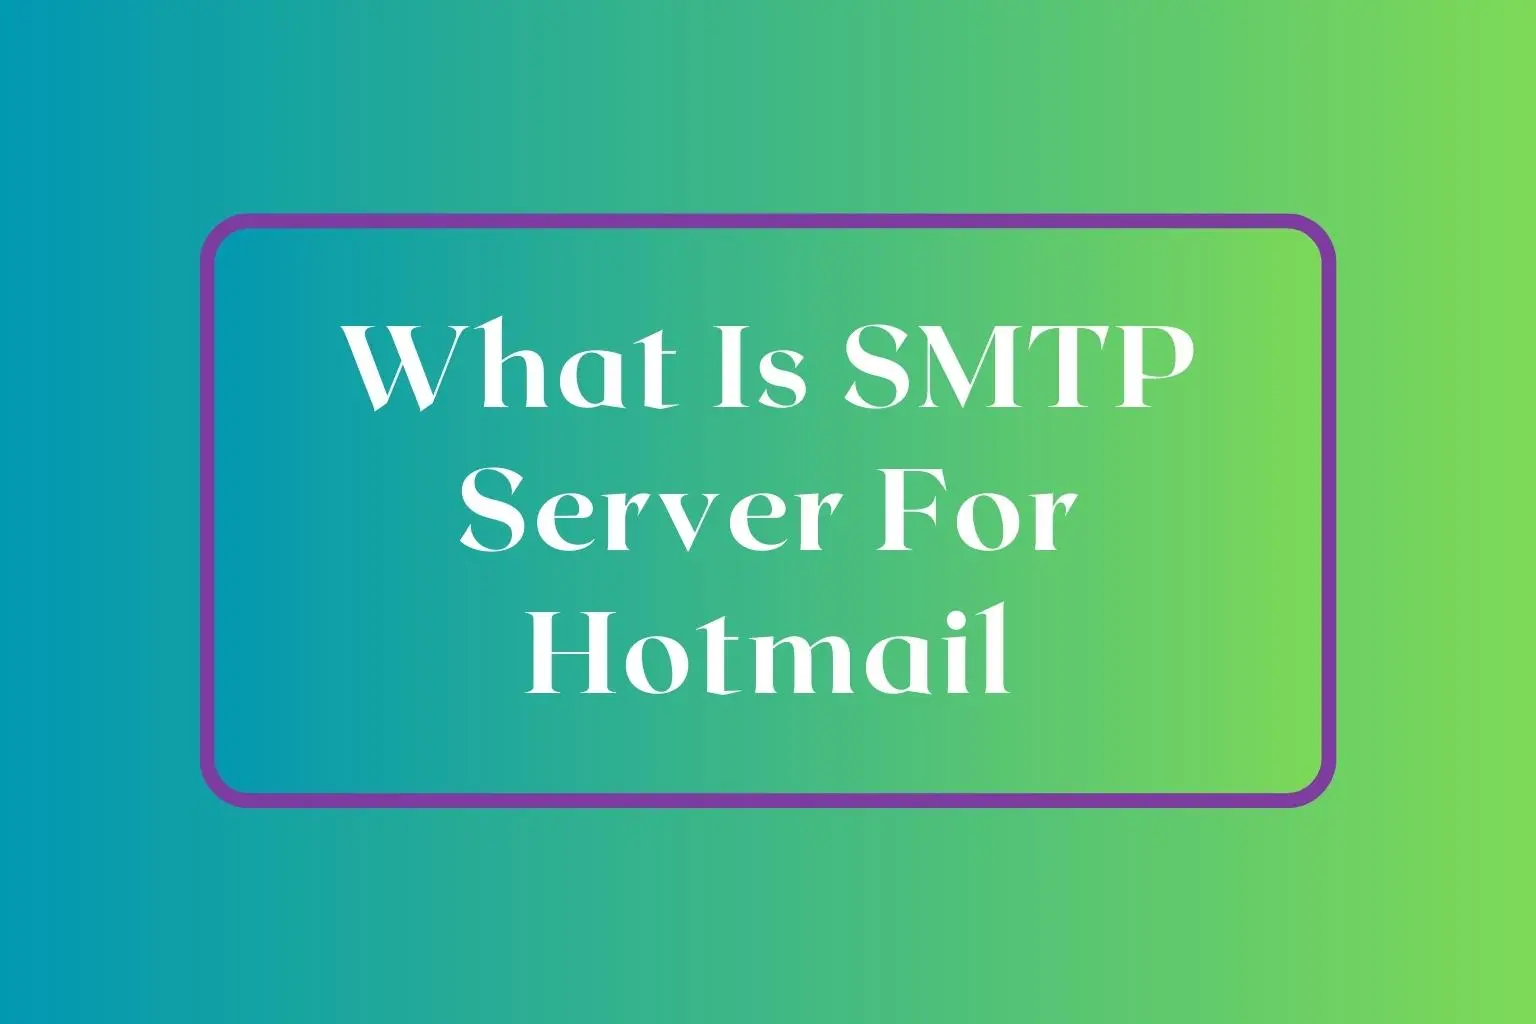 What Is SMTP Server For Hotmail